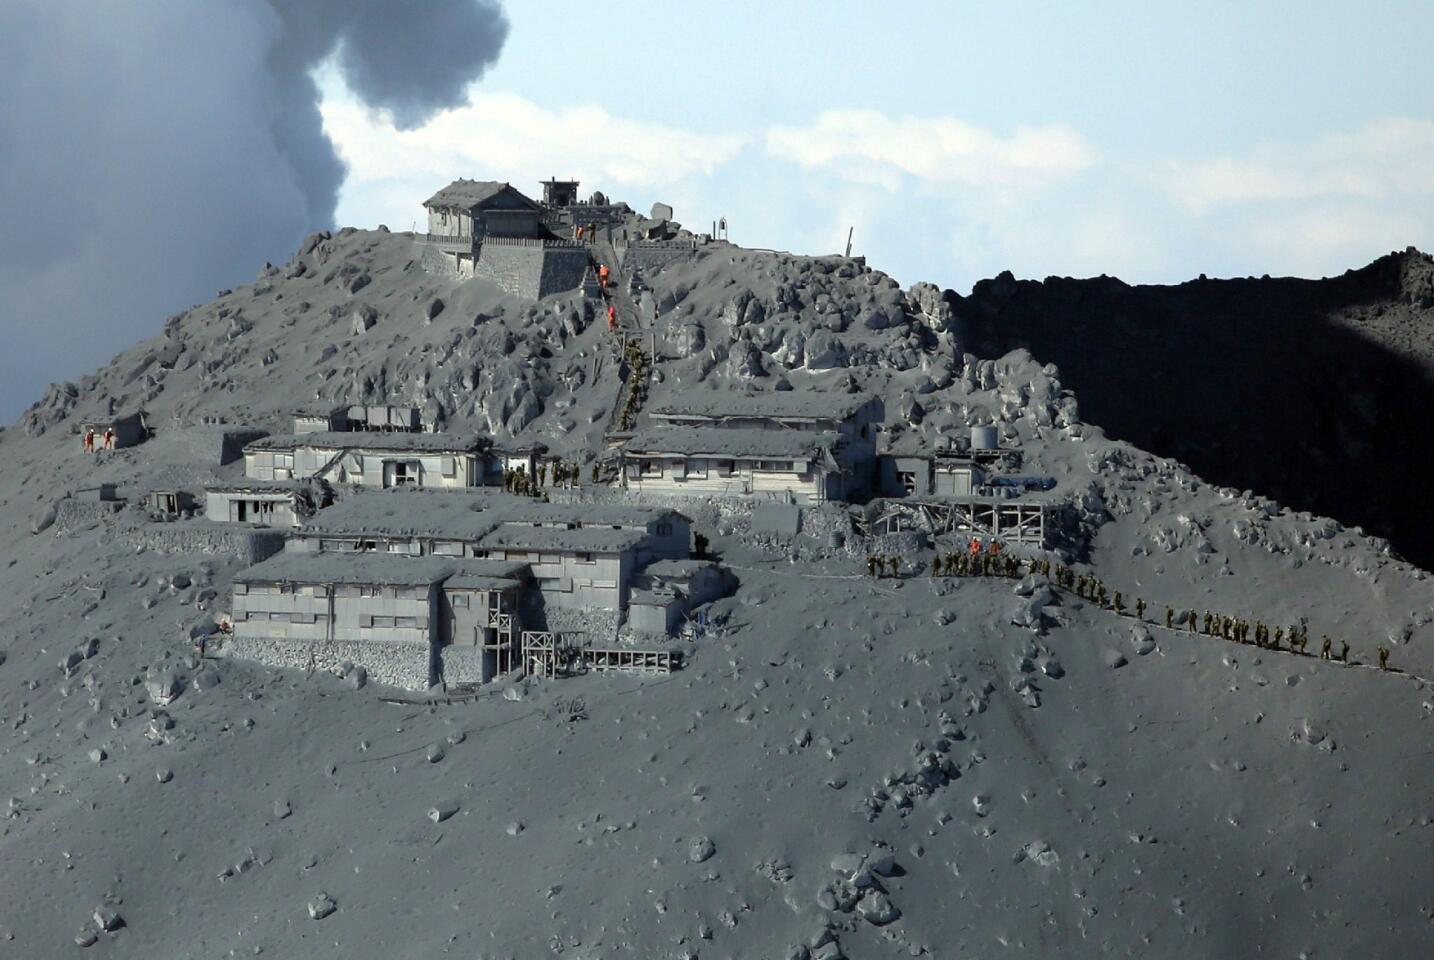 An aerial photo shows rescue workers and soldiers searching for survivors among ash-covered cottages and a Shinto shrine on Sept. 28 after Japan's Mt. Ontake volcano erupted.